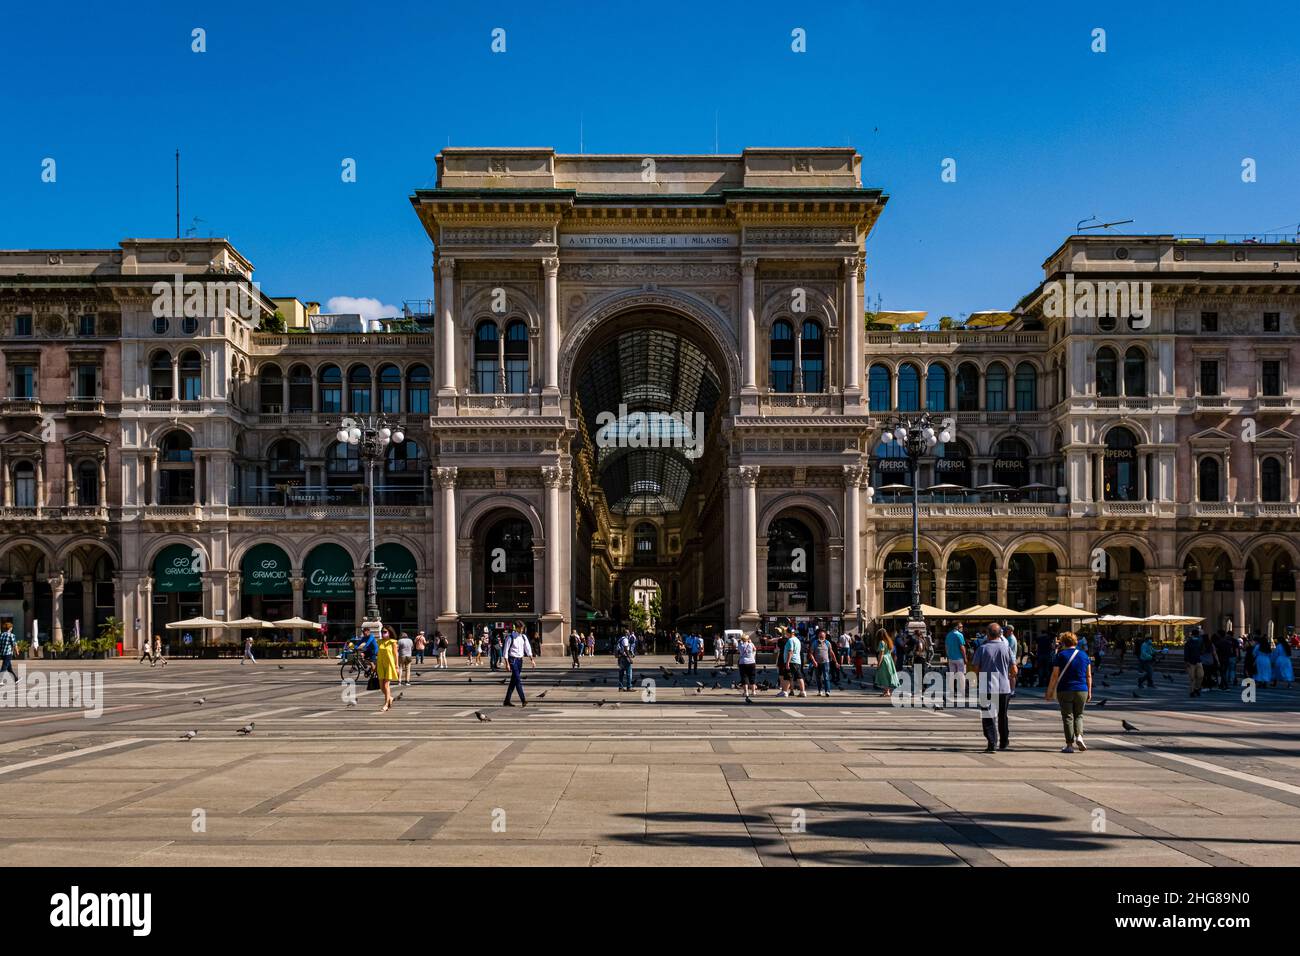 The facade of Galleria Vittorio Emanuele II, Italy's oldest active shopping gallery, seen from Cathedral Square, Piazza del Duomo. Stock Photo